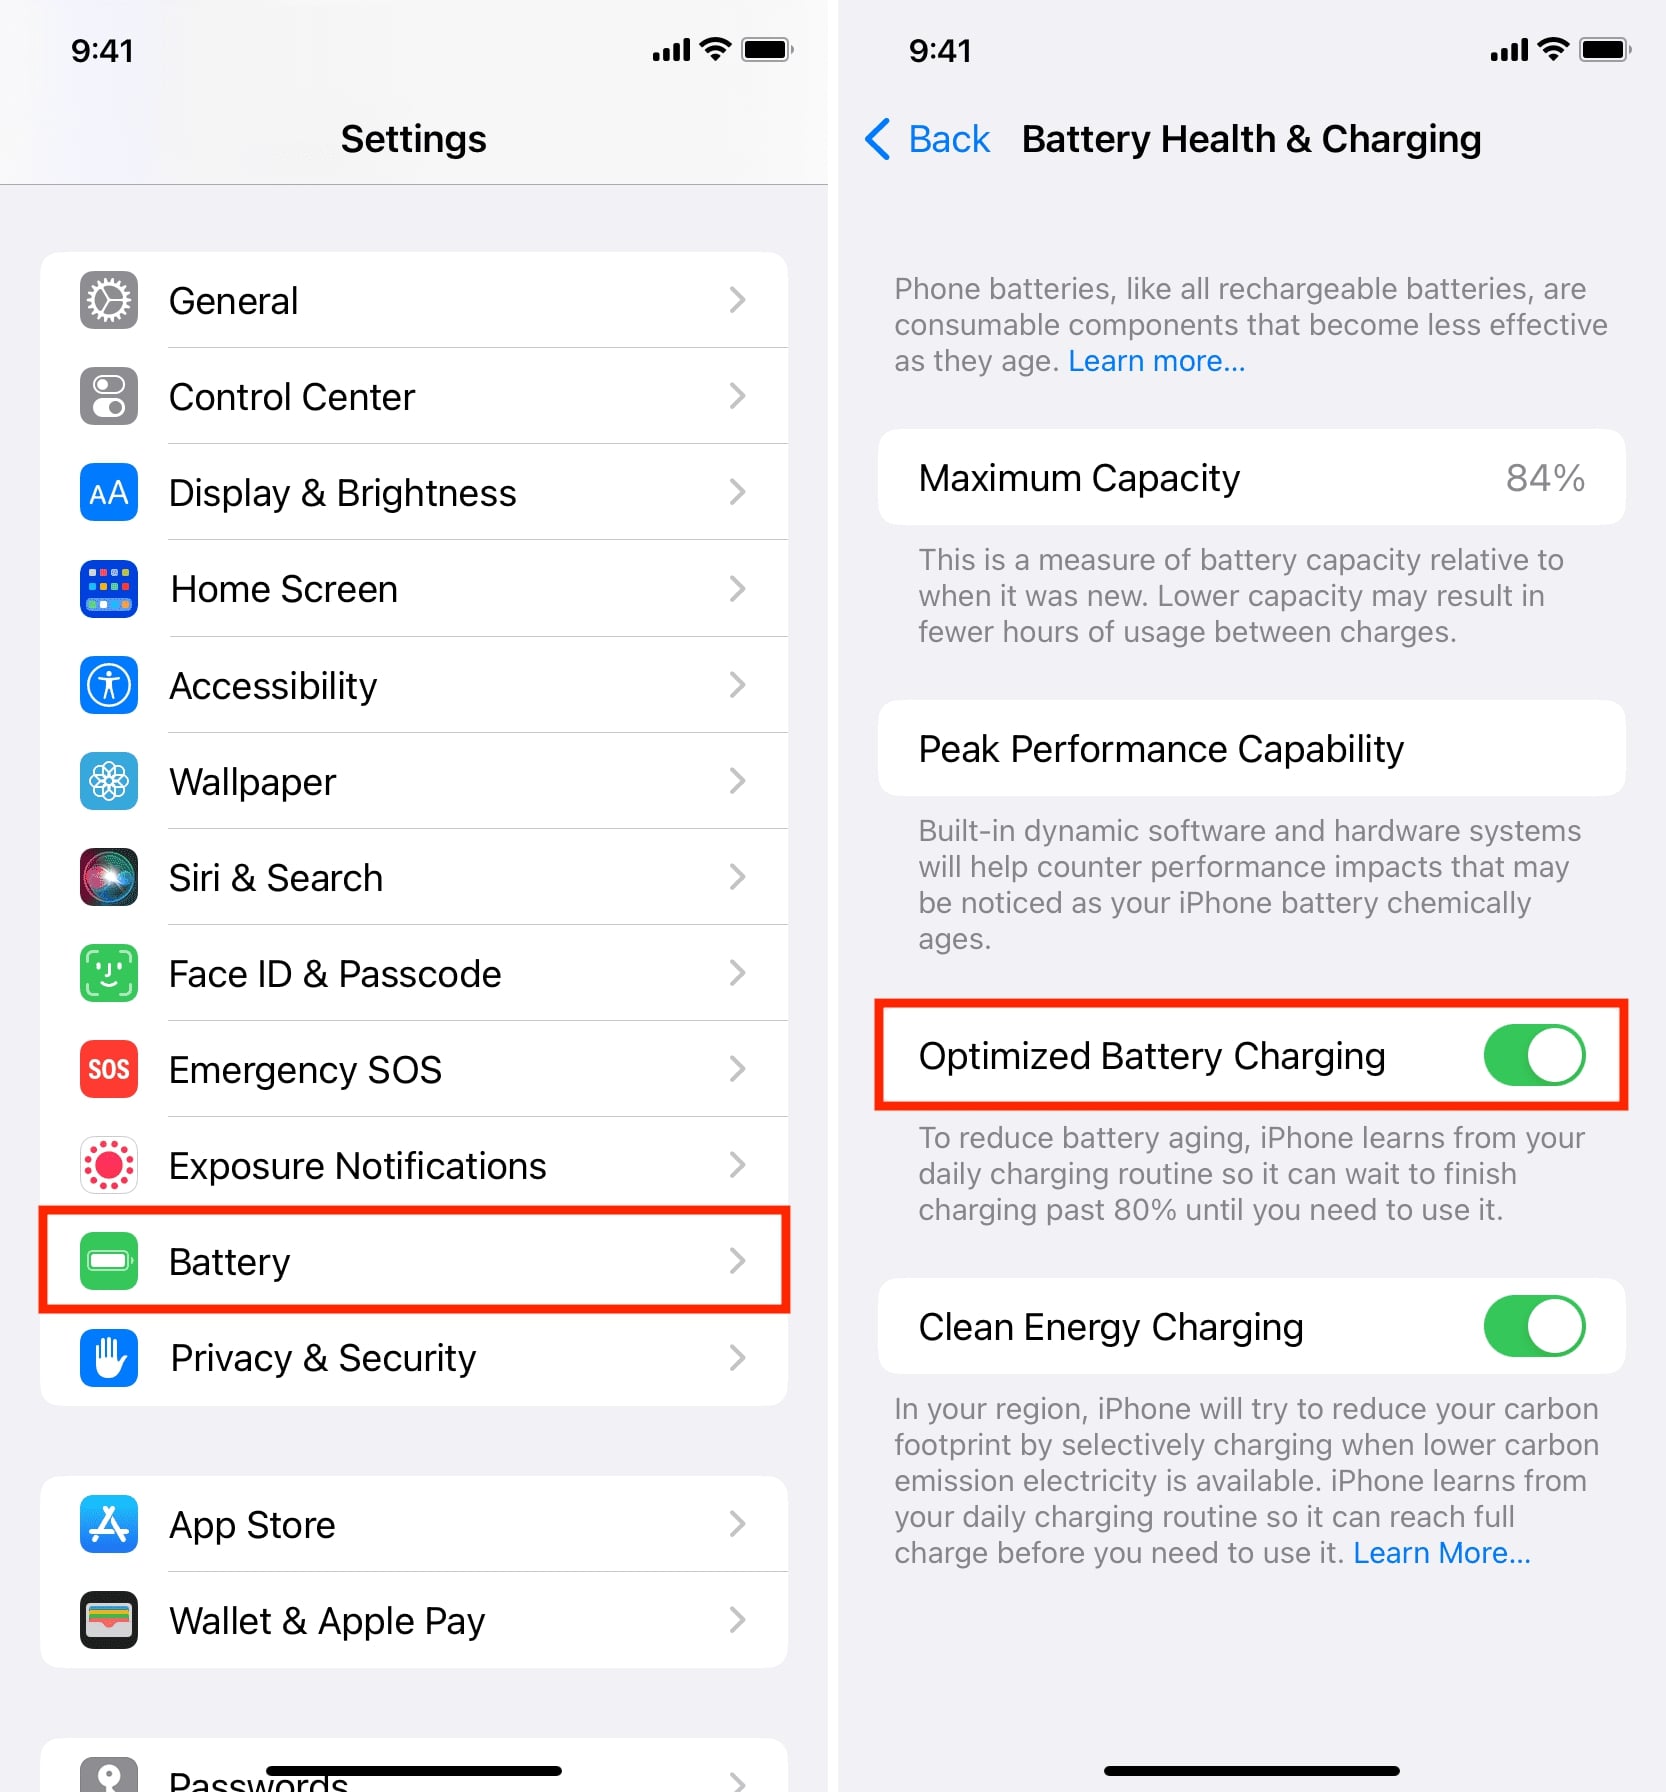 iphone battery health and charging settings